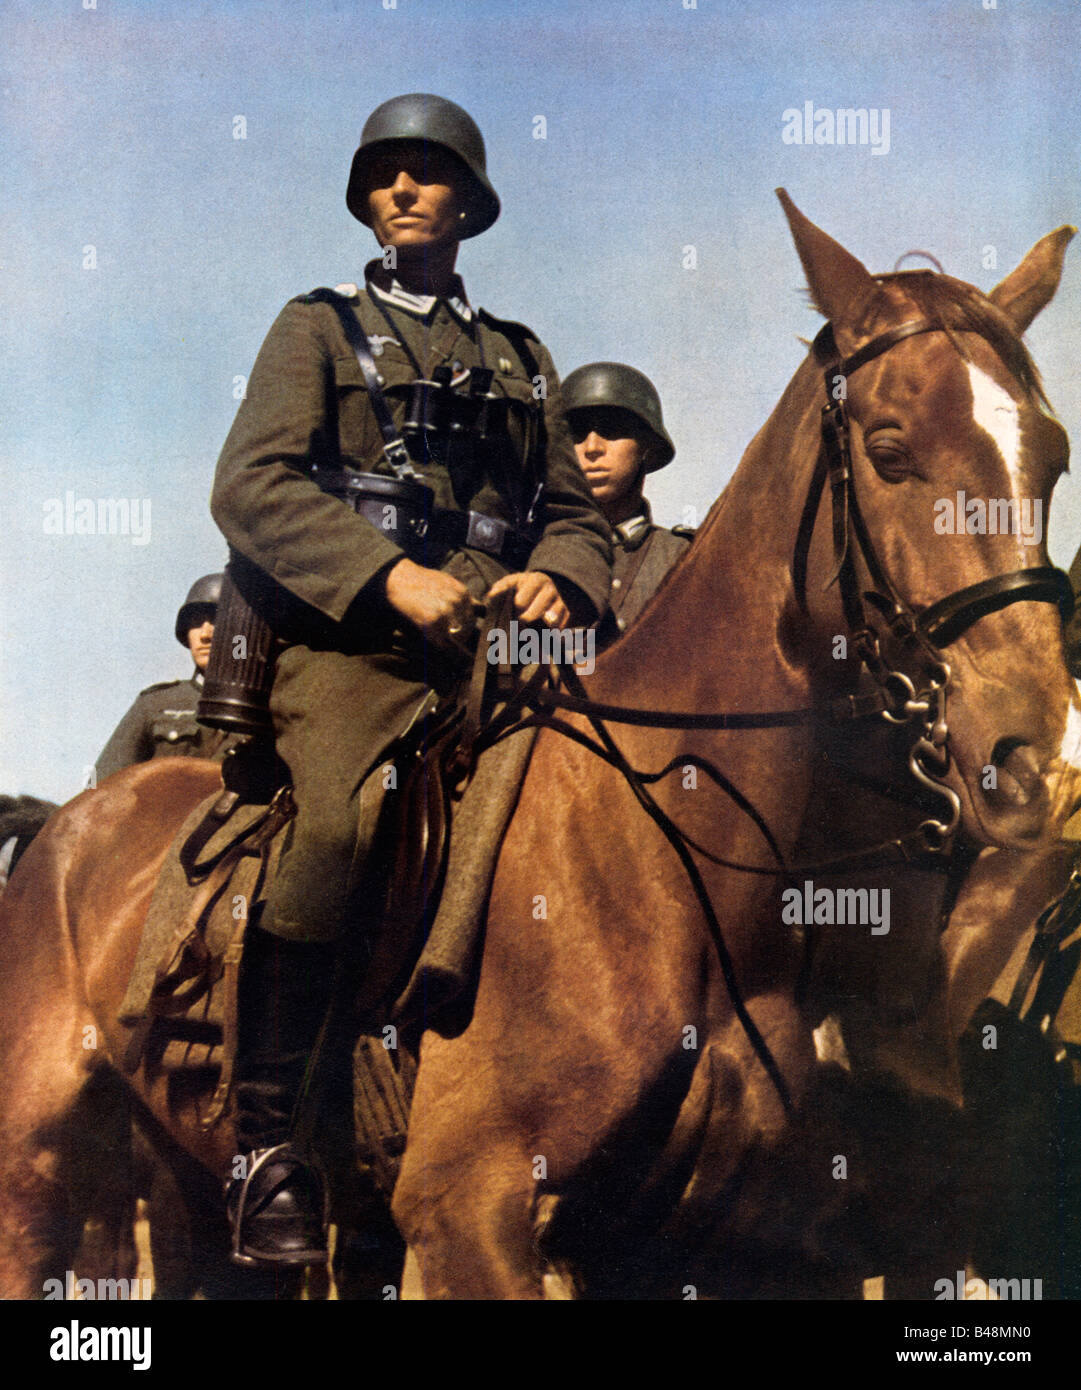 Wehrmacht Reiterzugfuhrer German mounted infantry officer on the Eastern Front in the Russian campaign in WW II Stock Photo